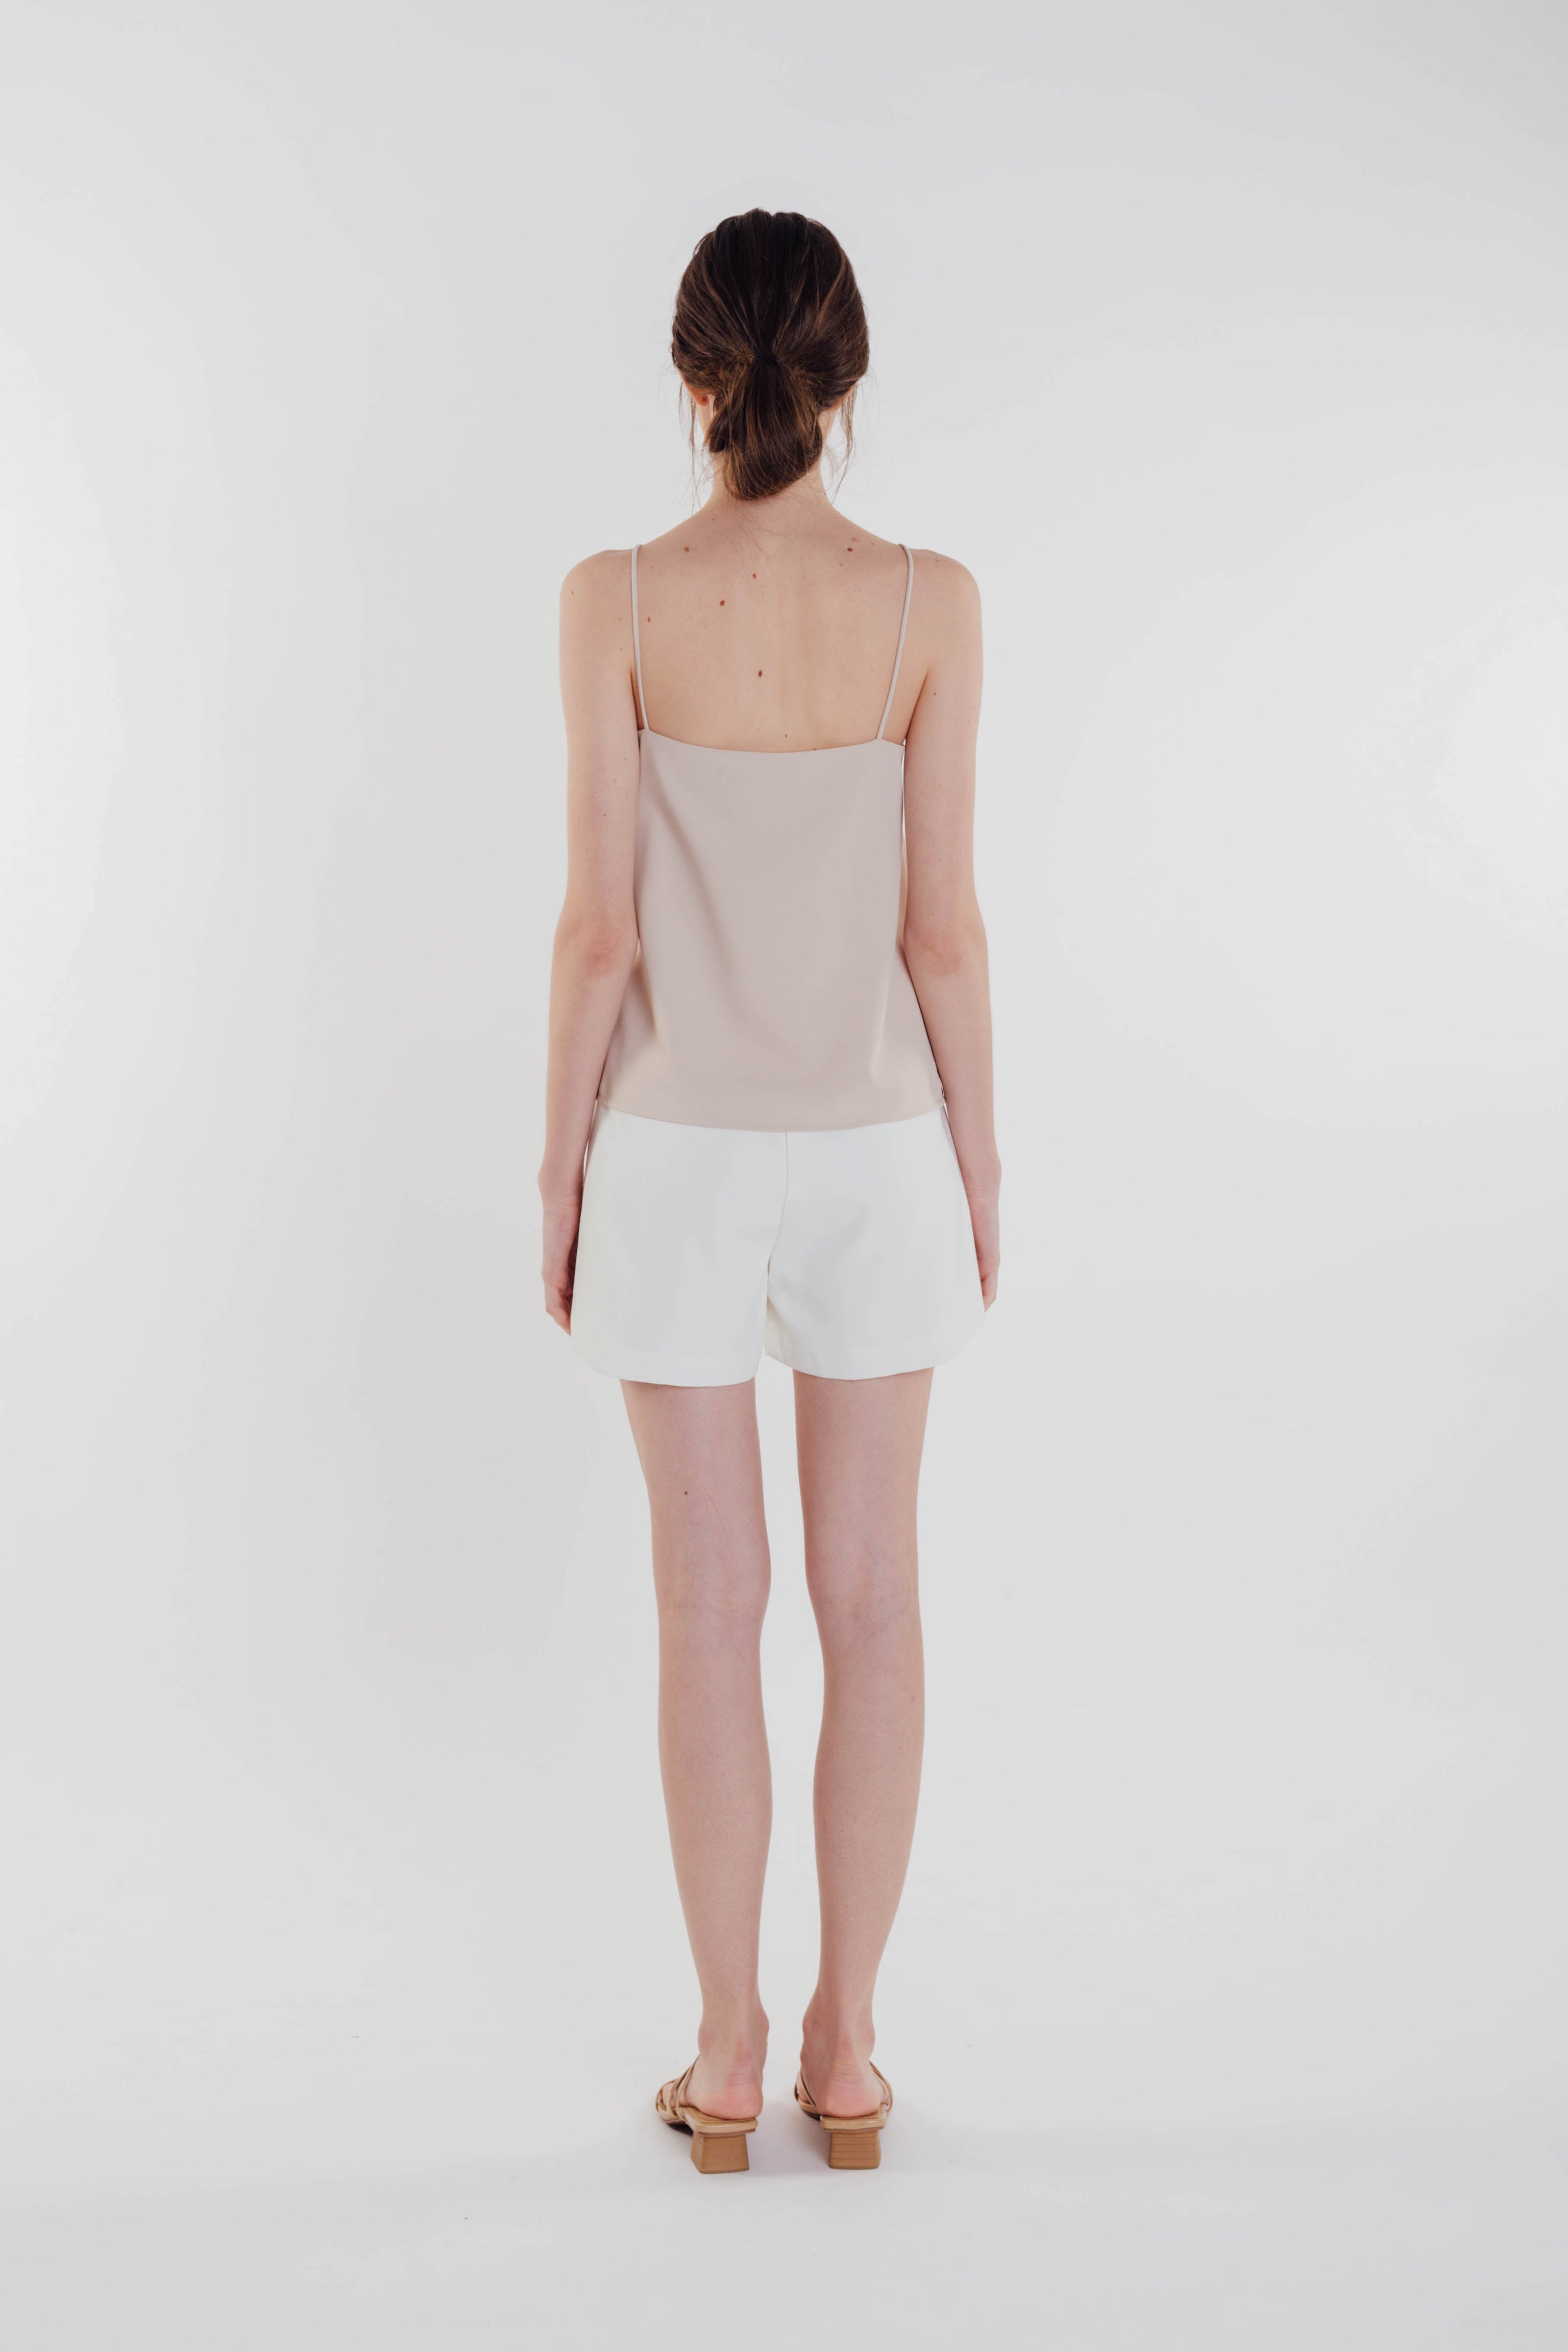 V-neck Camisole in Sand